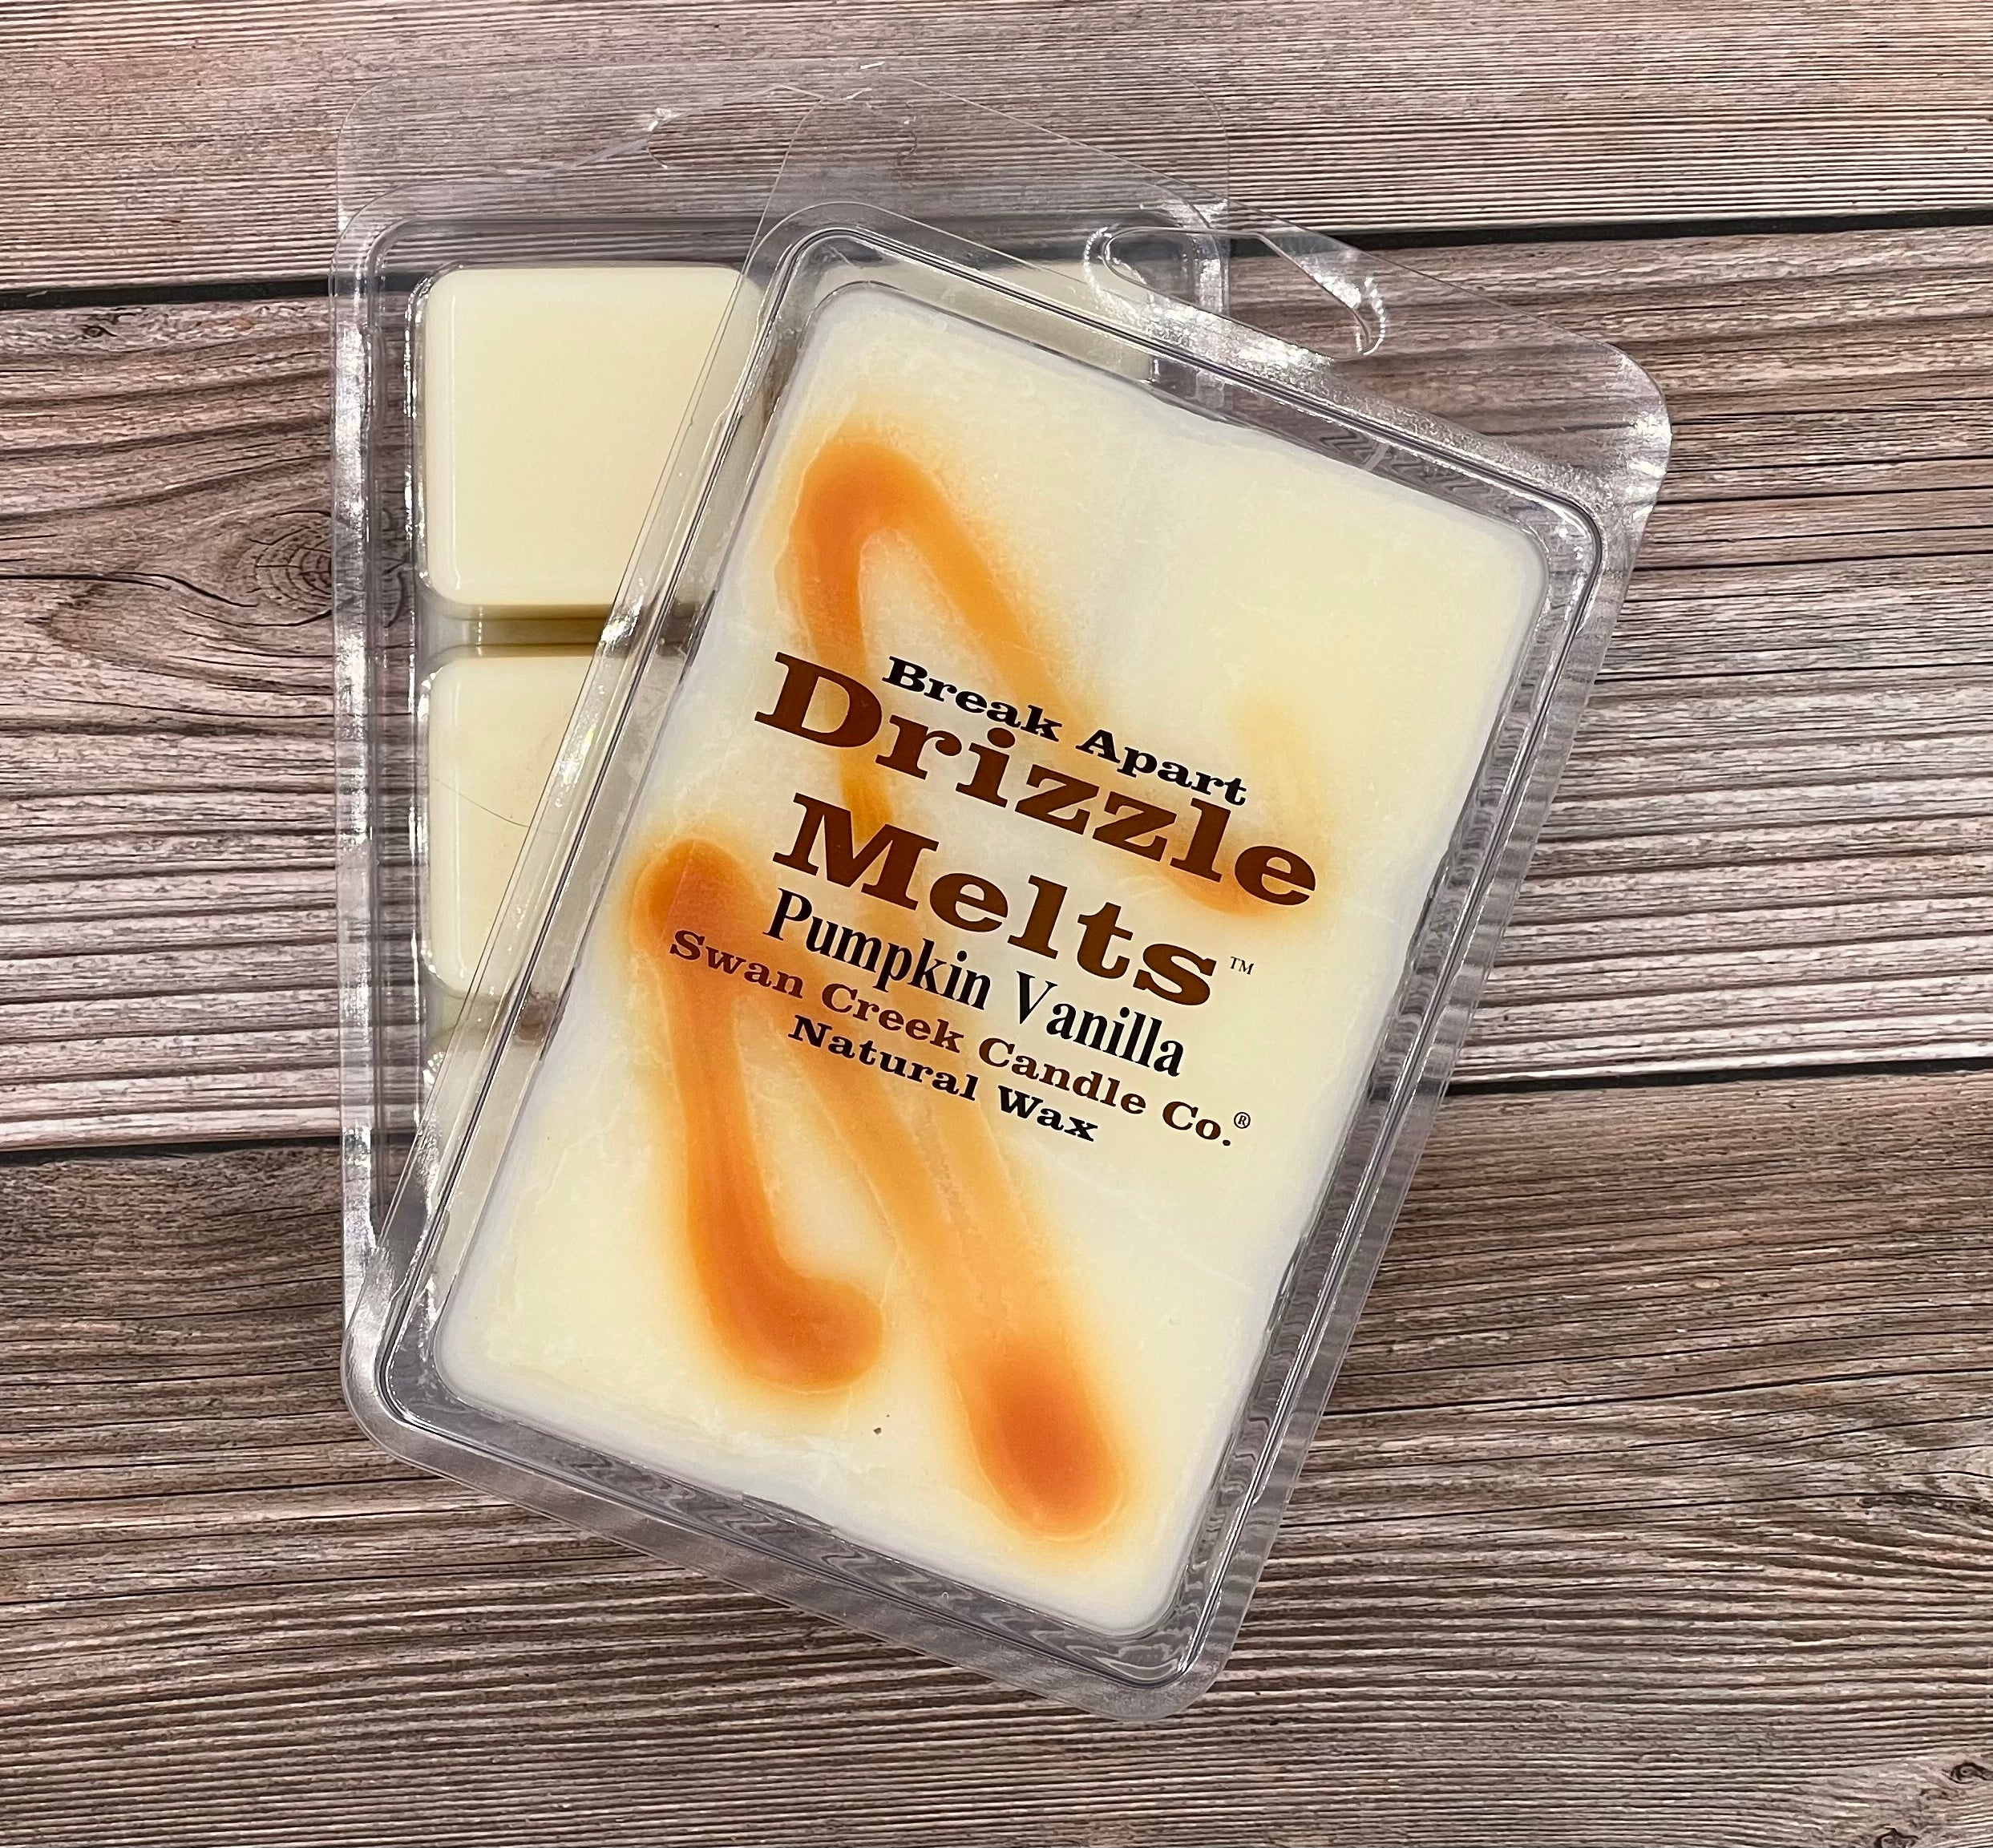 Image of Pumpkin Vanilla 5.25oz Drizzle Melts by Swan Creek Candle